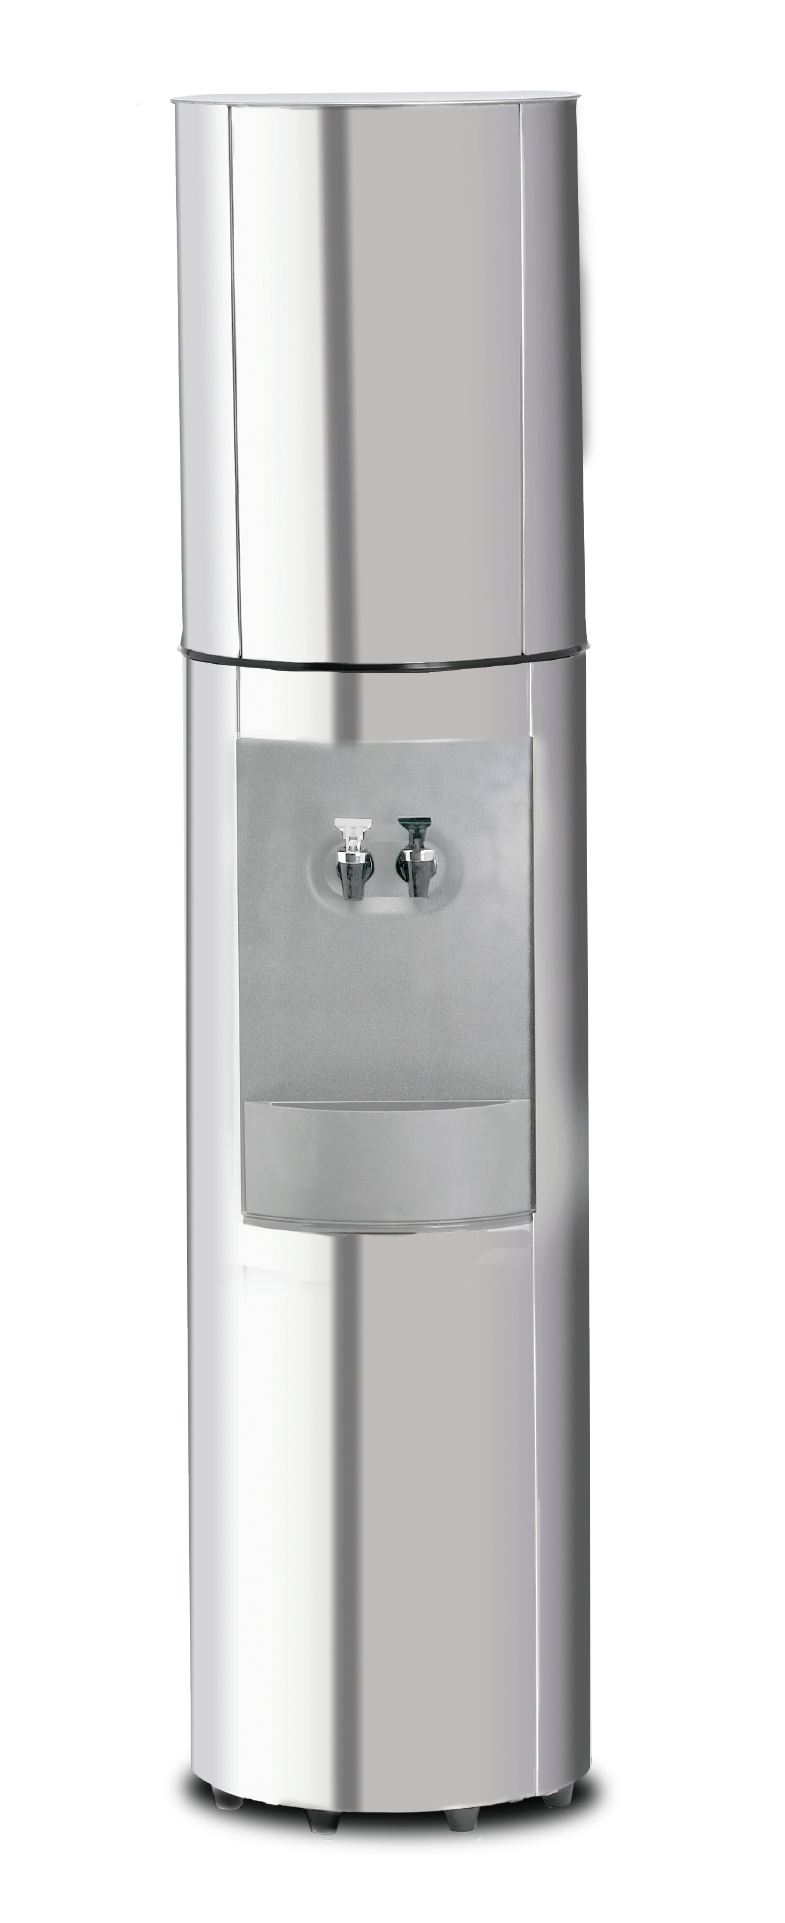 Triple S2 Stainless Steel Bottleless Water Cooler - Cold/Cold